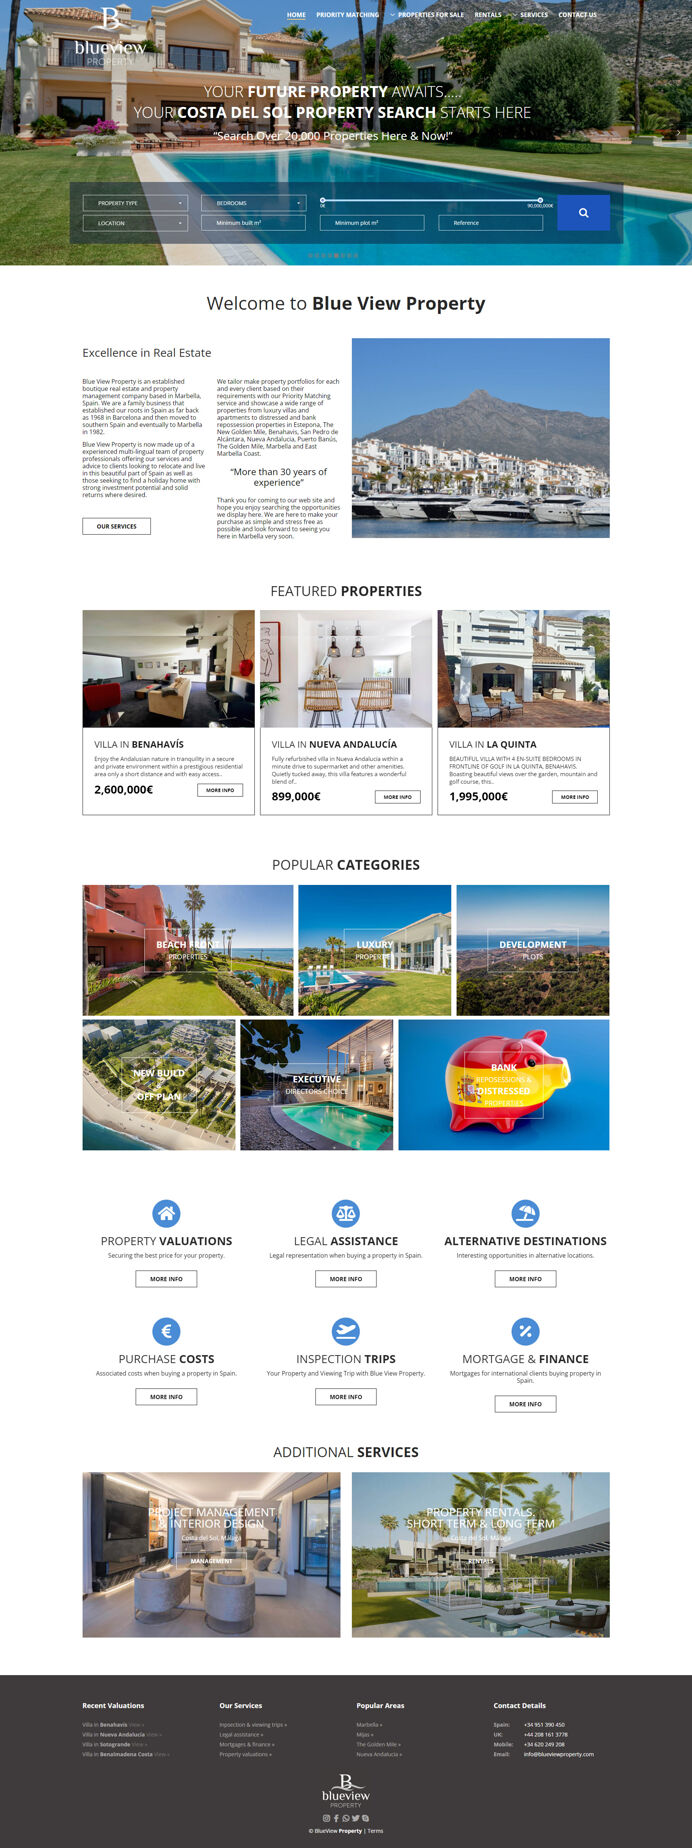 New real estate website design for BlueView Properties Marbella - Modern visual layout with integrated real estate search system